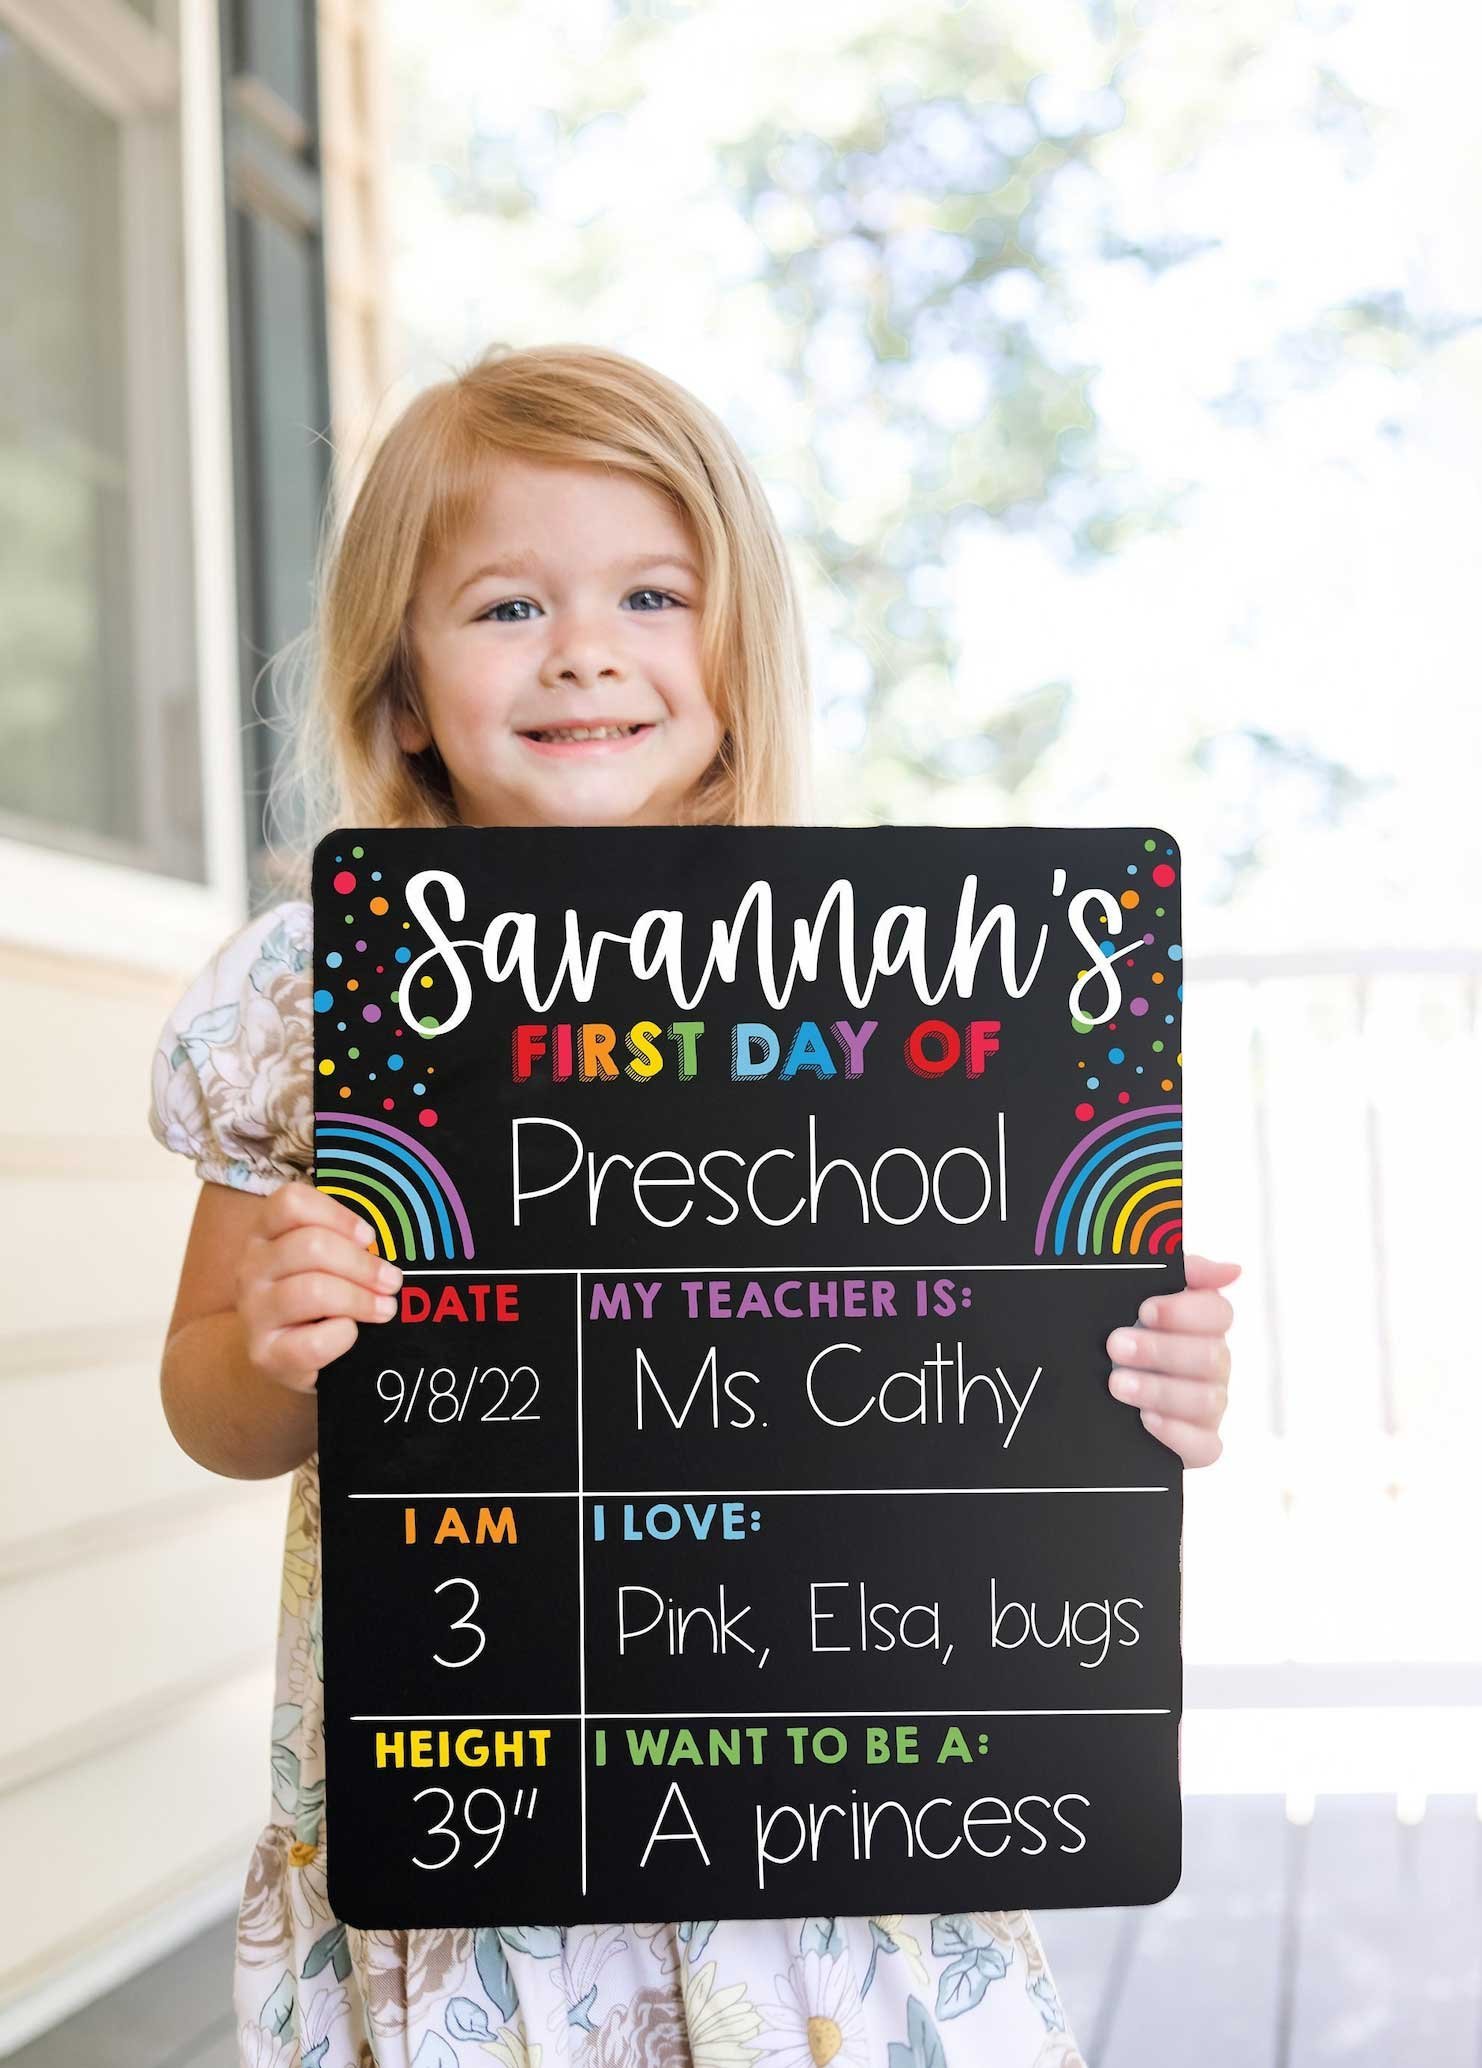 12 First Day of School Photo Prop Signs You’ll Love